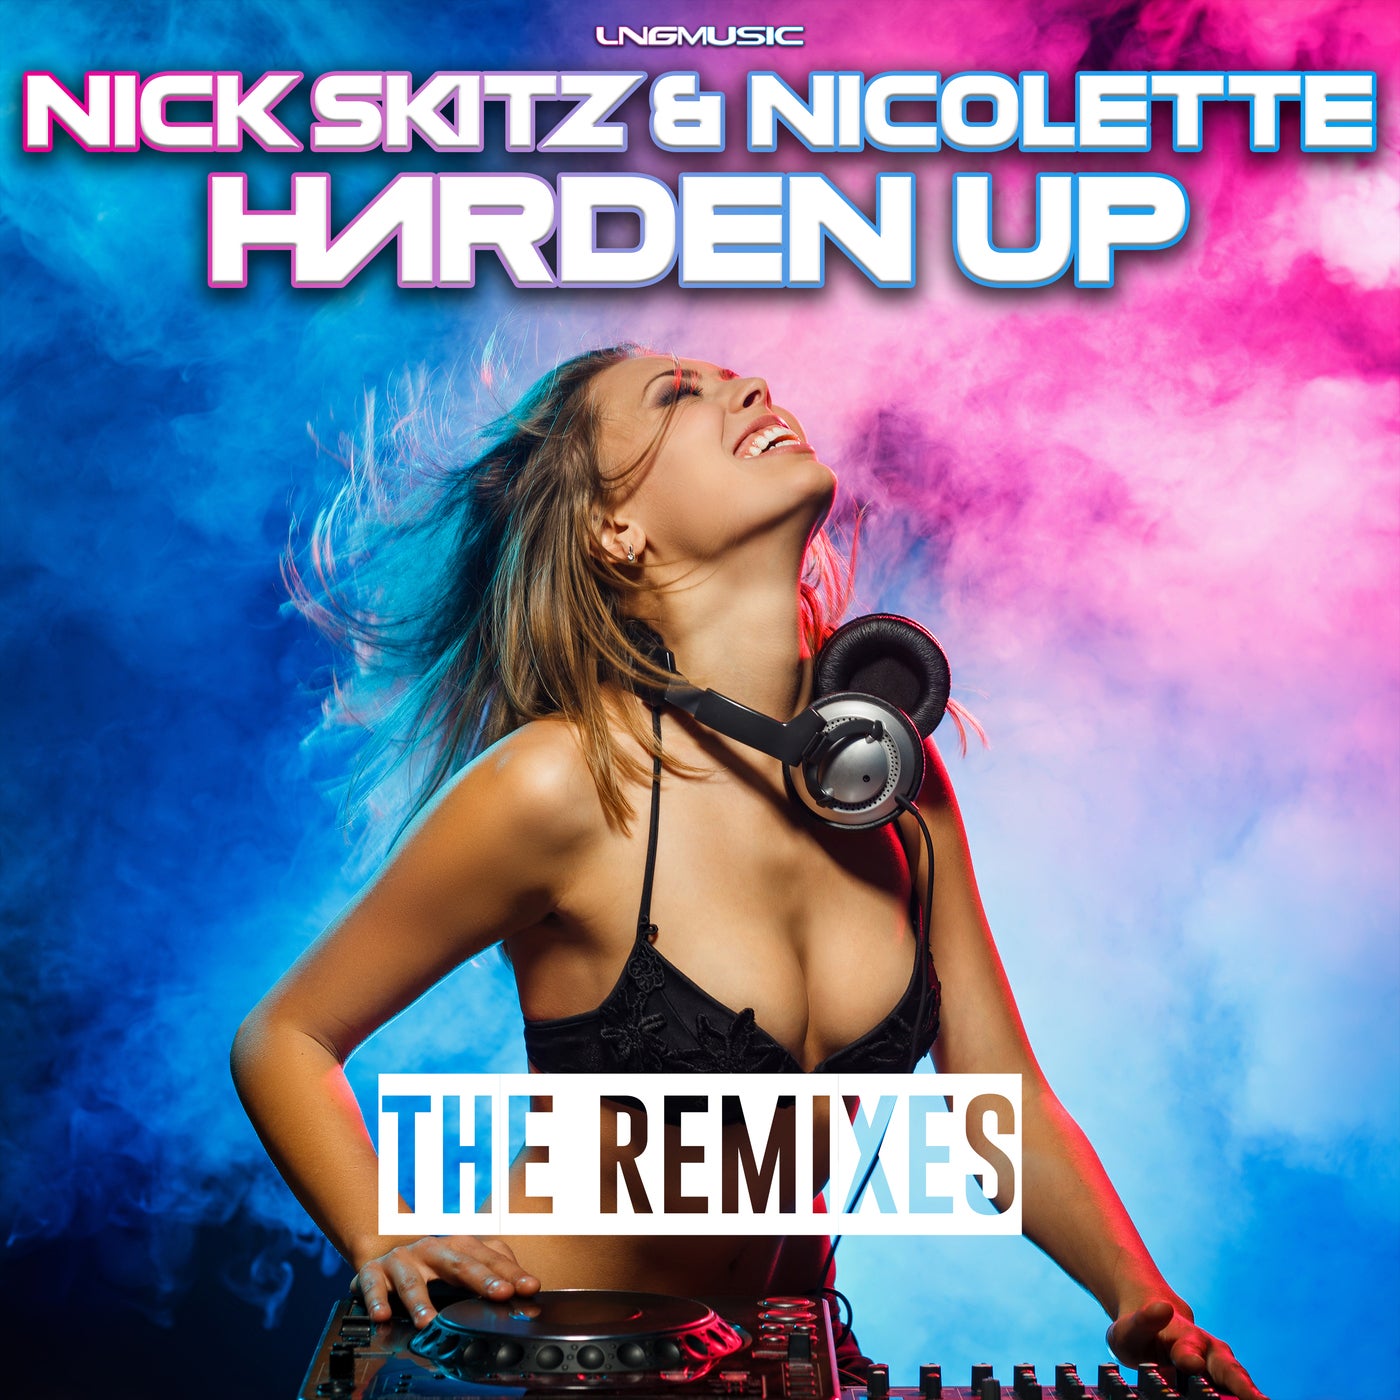 Harden Up (The Remixes)